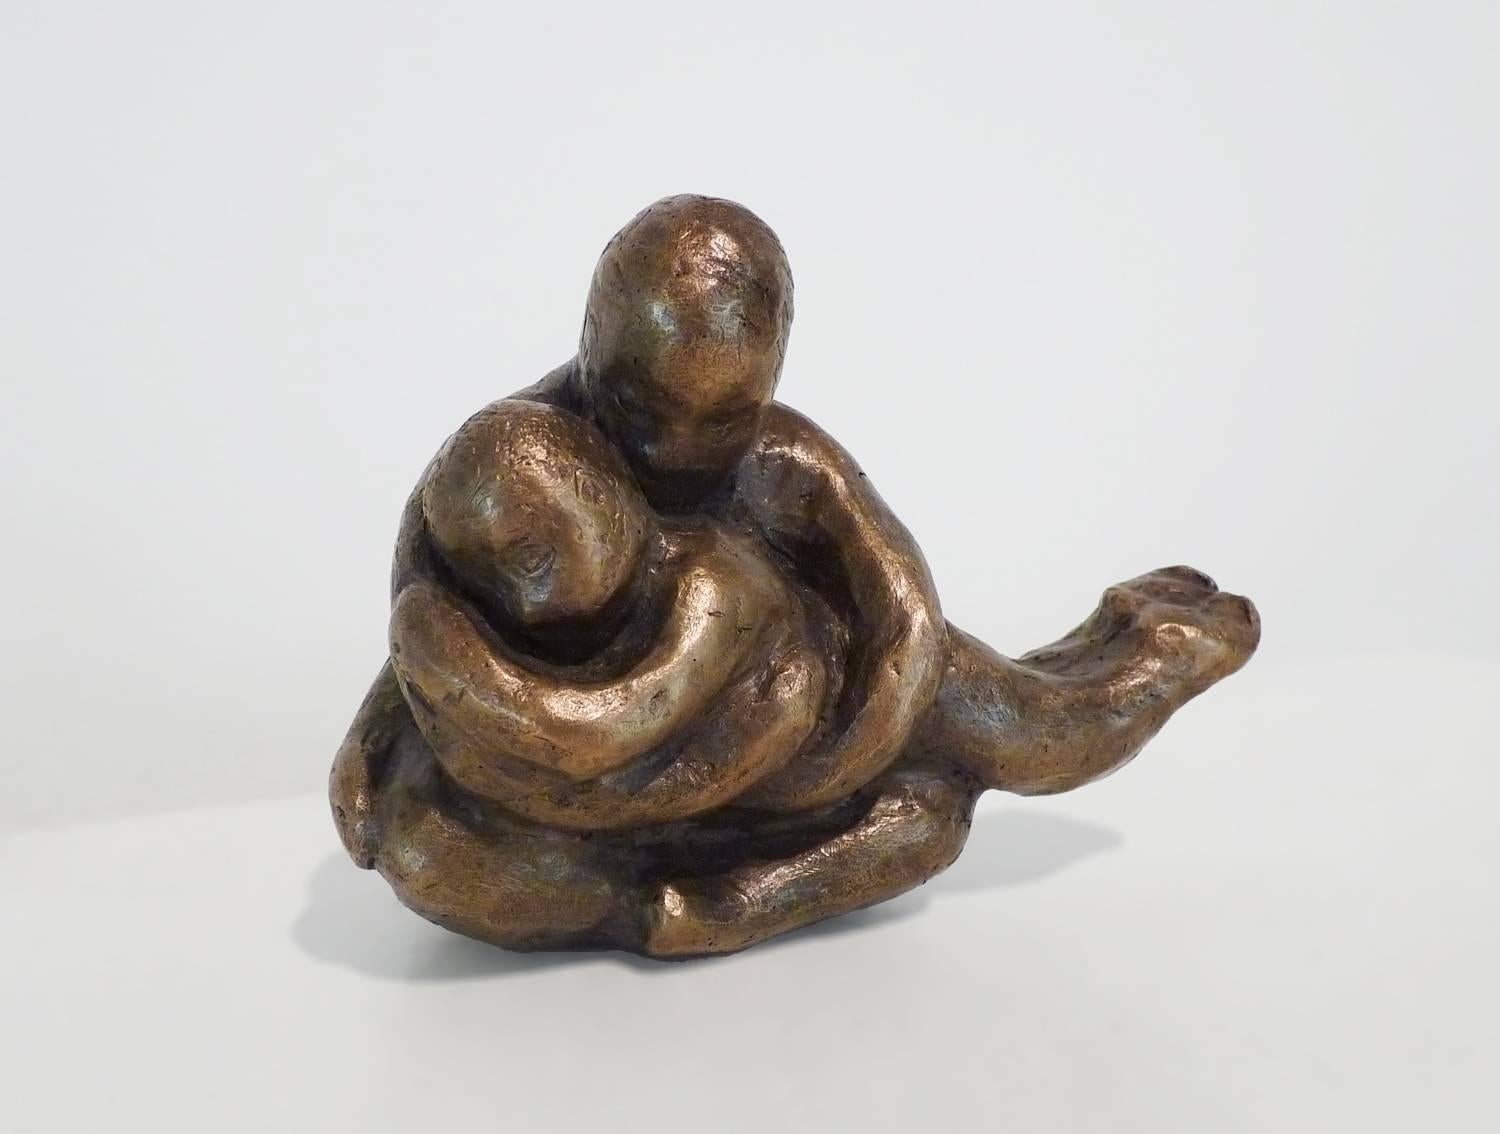 This lovely small bronze in a warm honey brown patina is a depiction of a mother enveloping her child, inspired by a scene sculptor Noa Bornstein witnessed at a train station. 

The optional wooden base (as shown on the second image) is included.